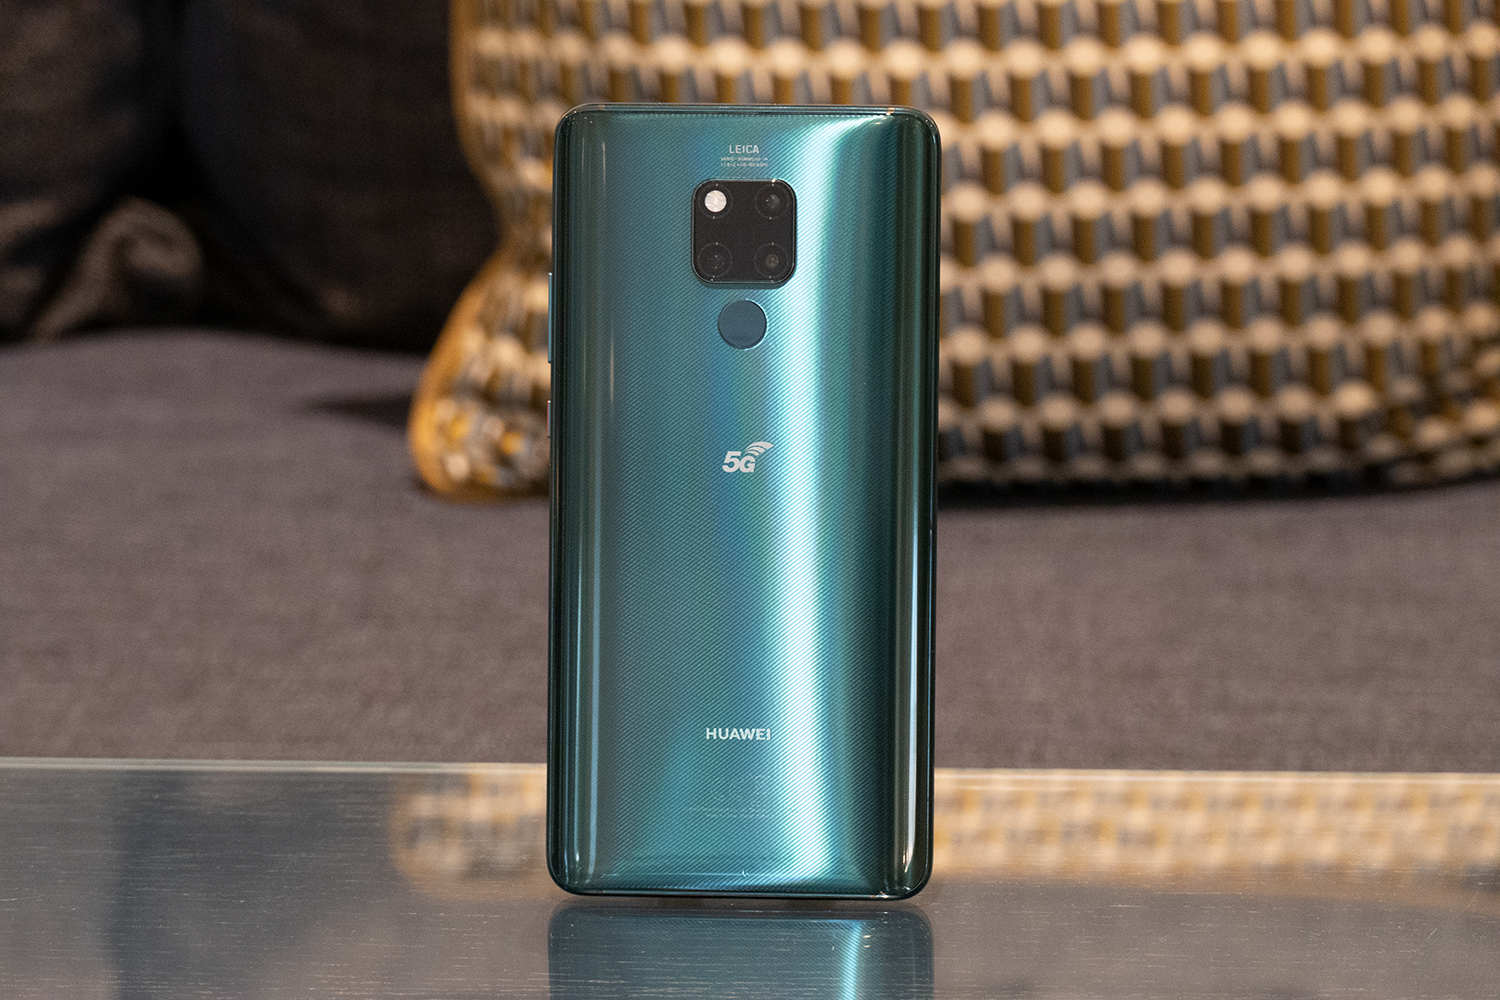 Huawei Mate 20 X 5G Hands-on Review | Digital Trends